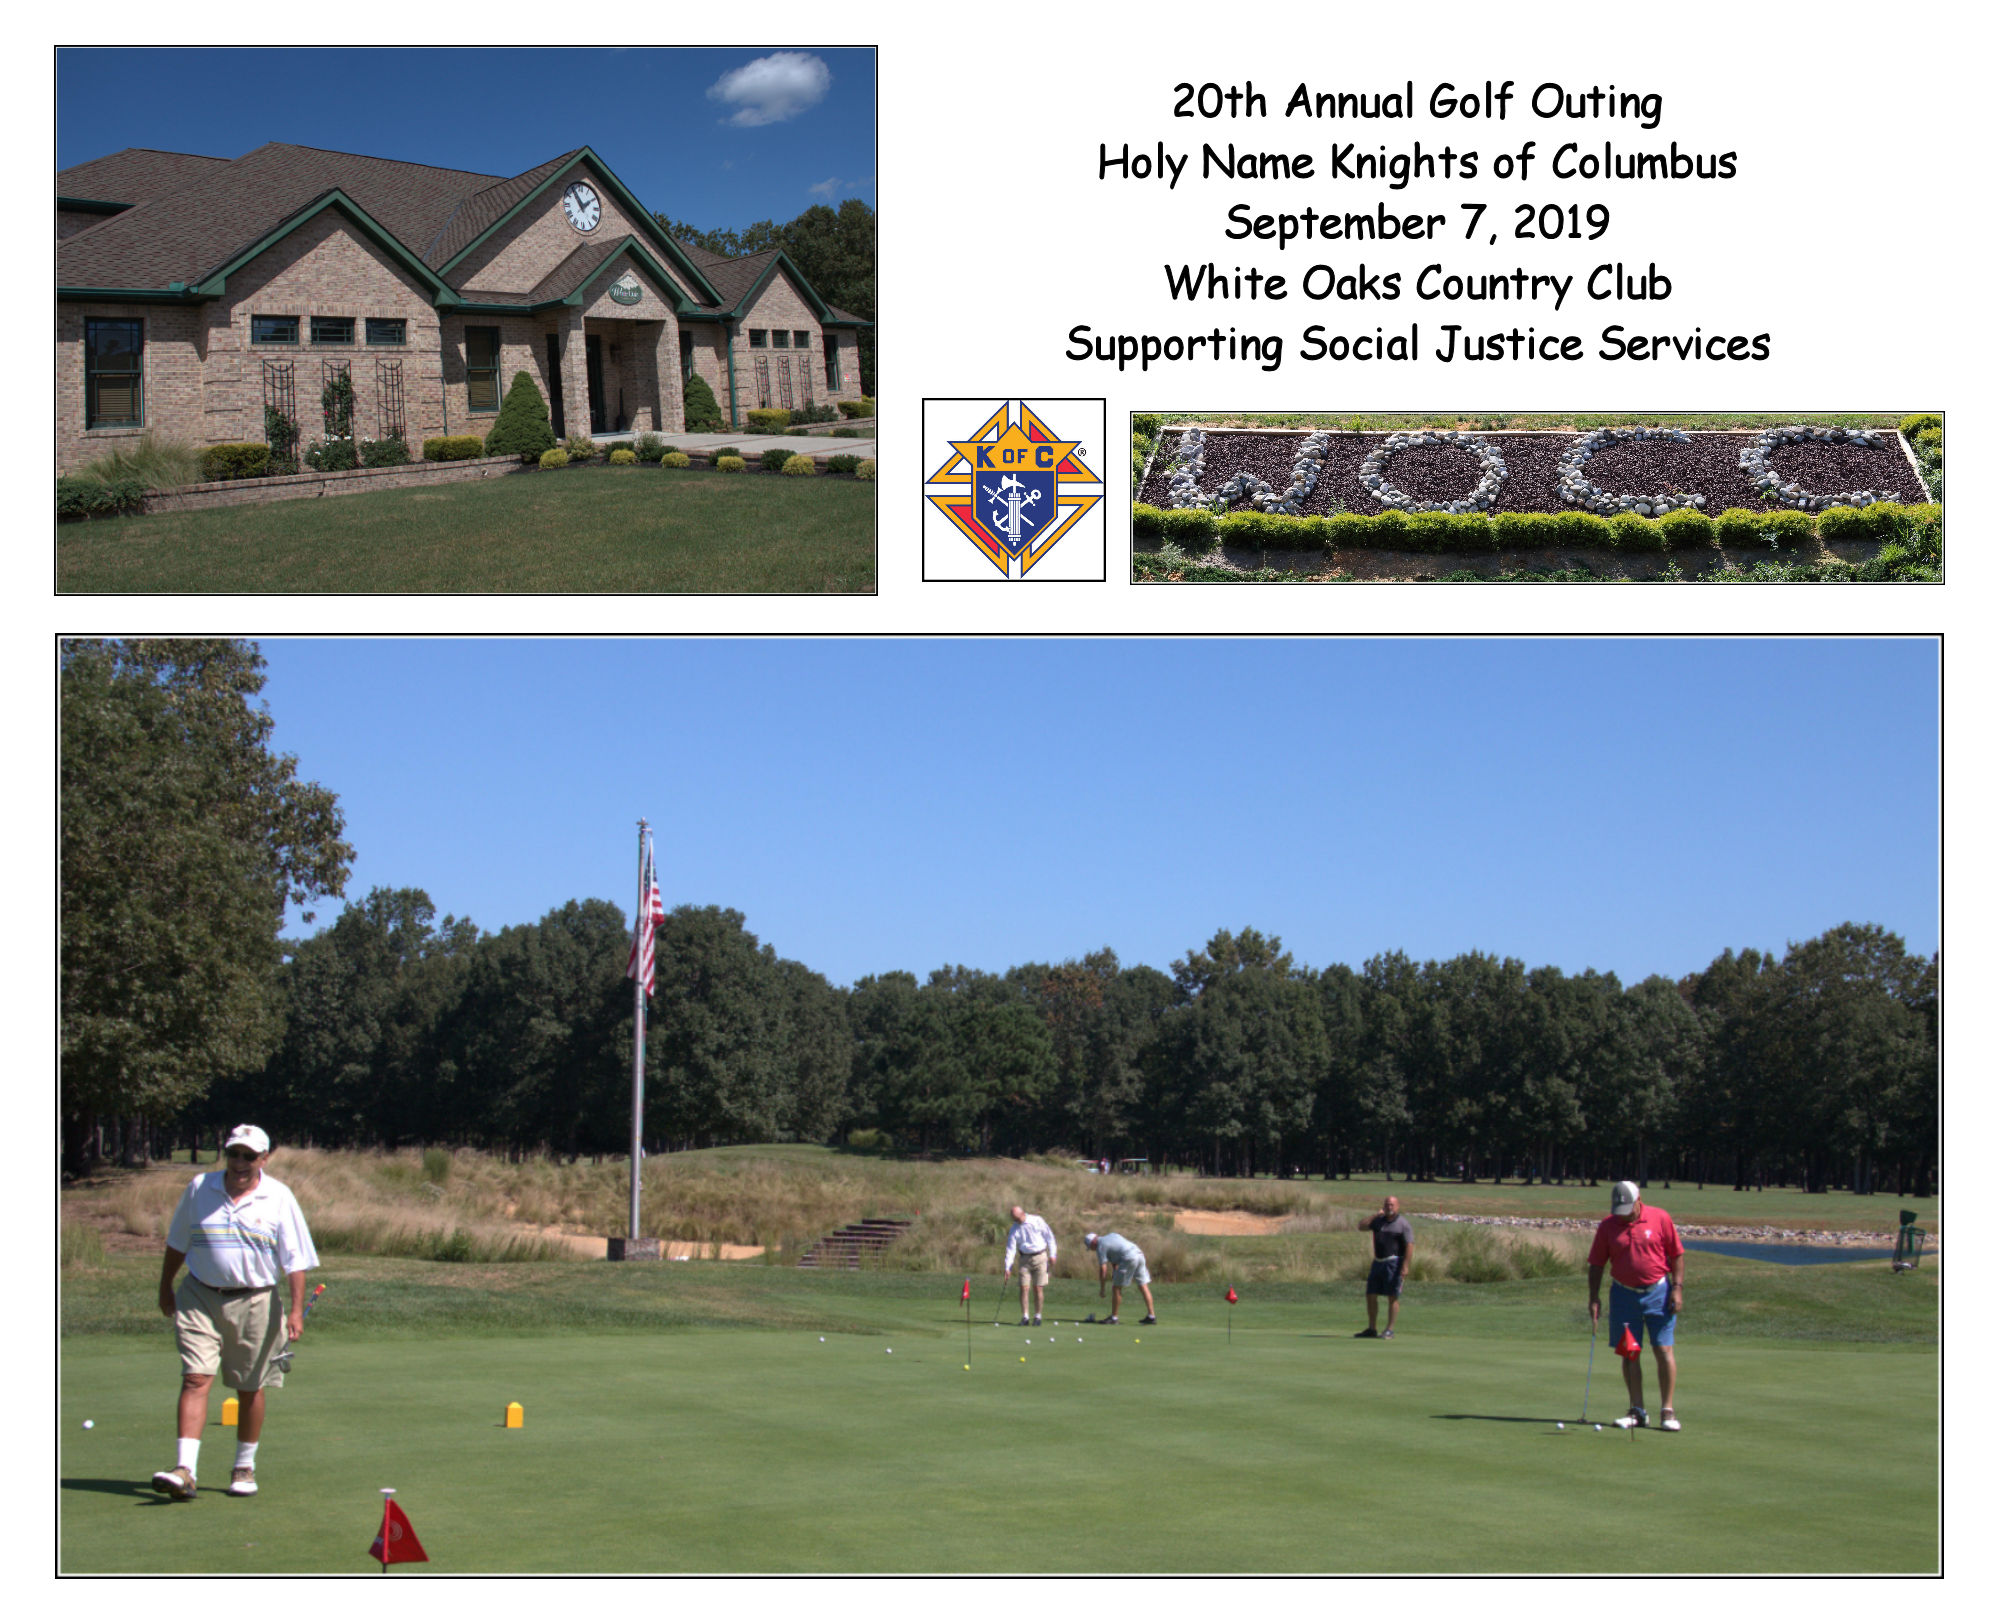 2019 Annual Golf Outing Holy Name Council 12503 Knights of Columbus